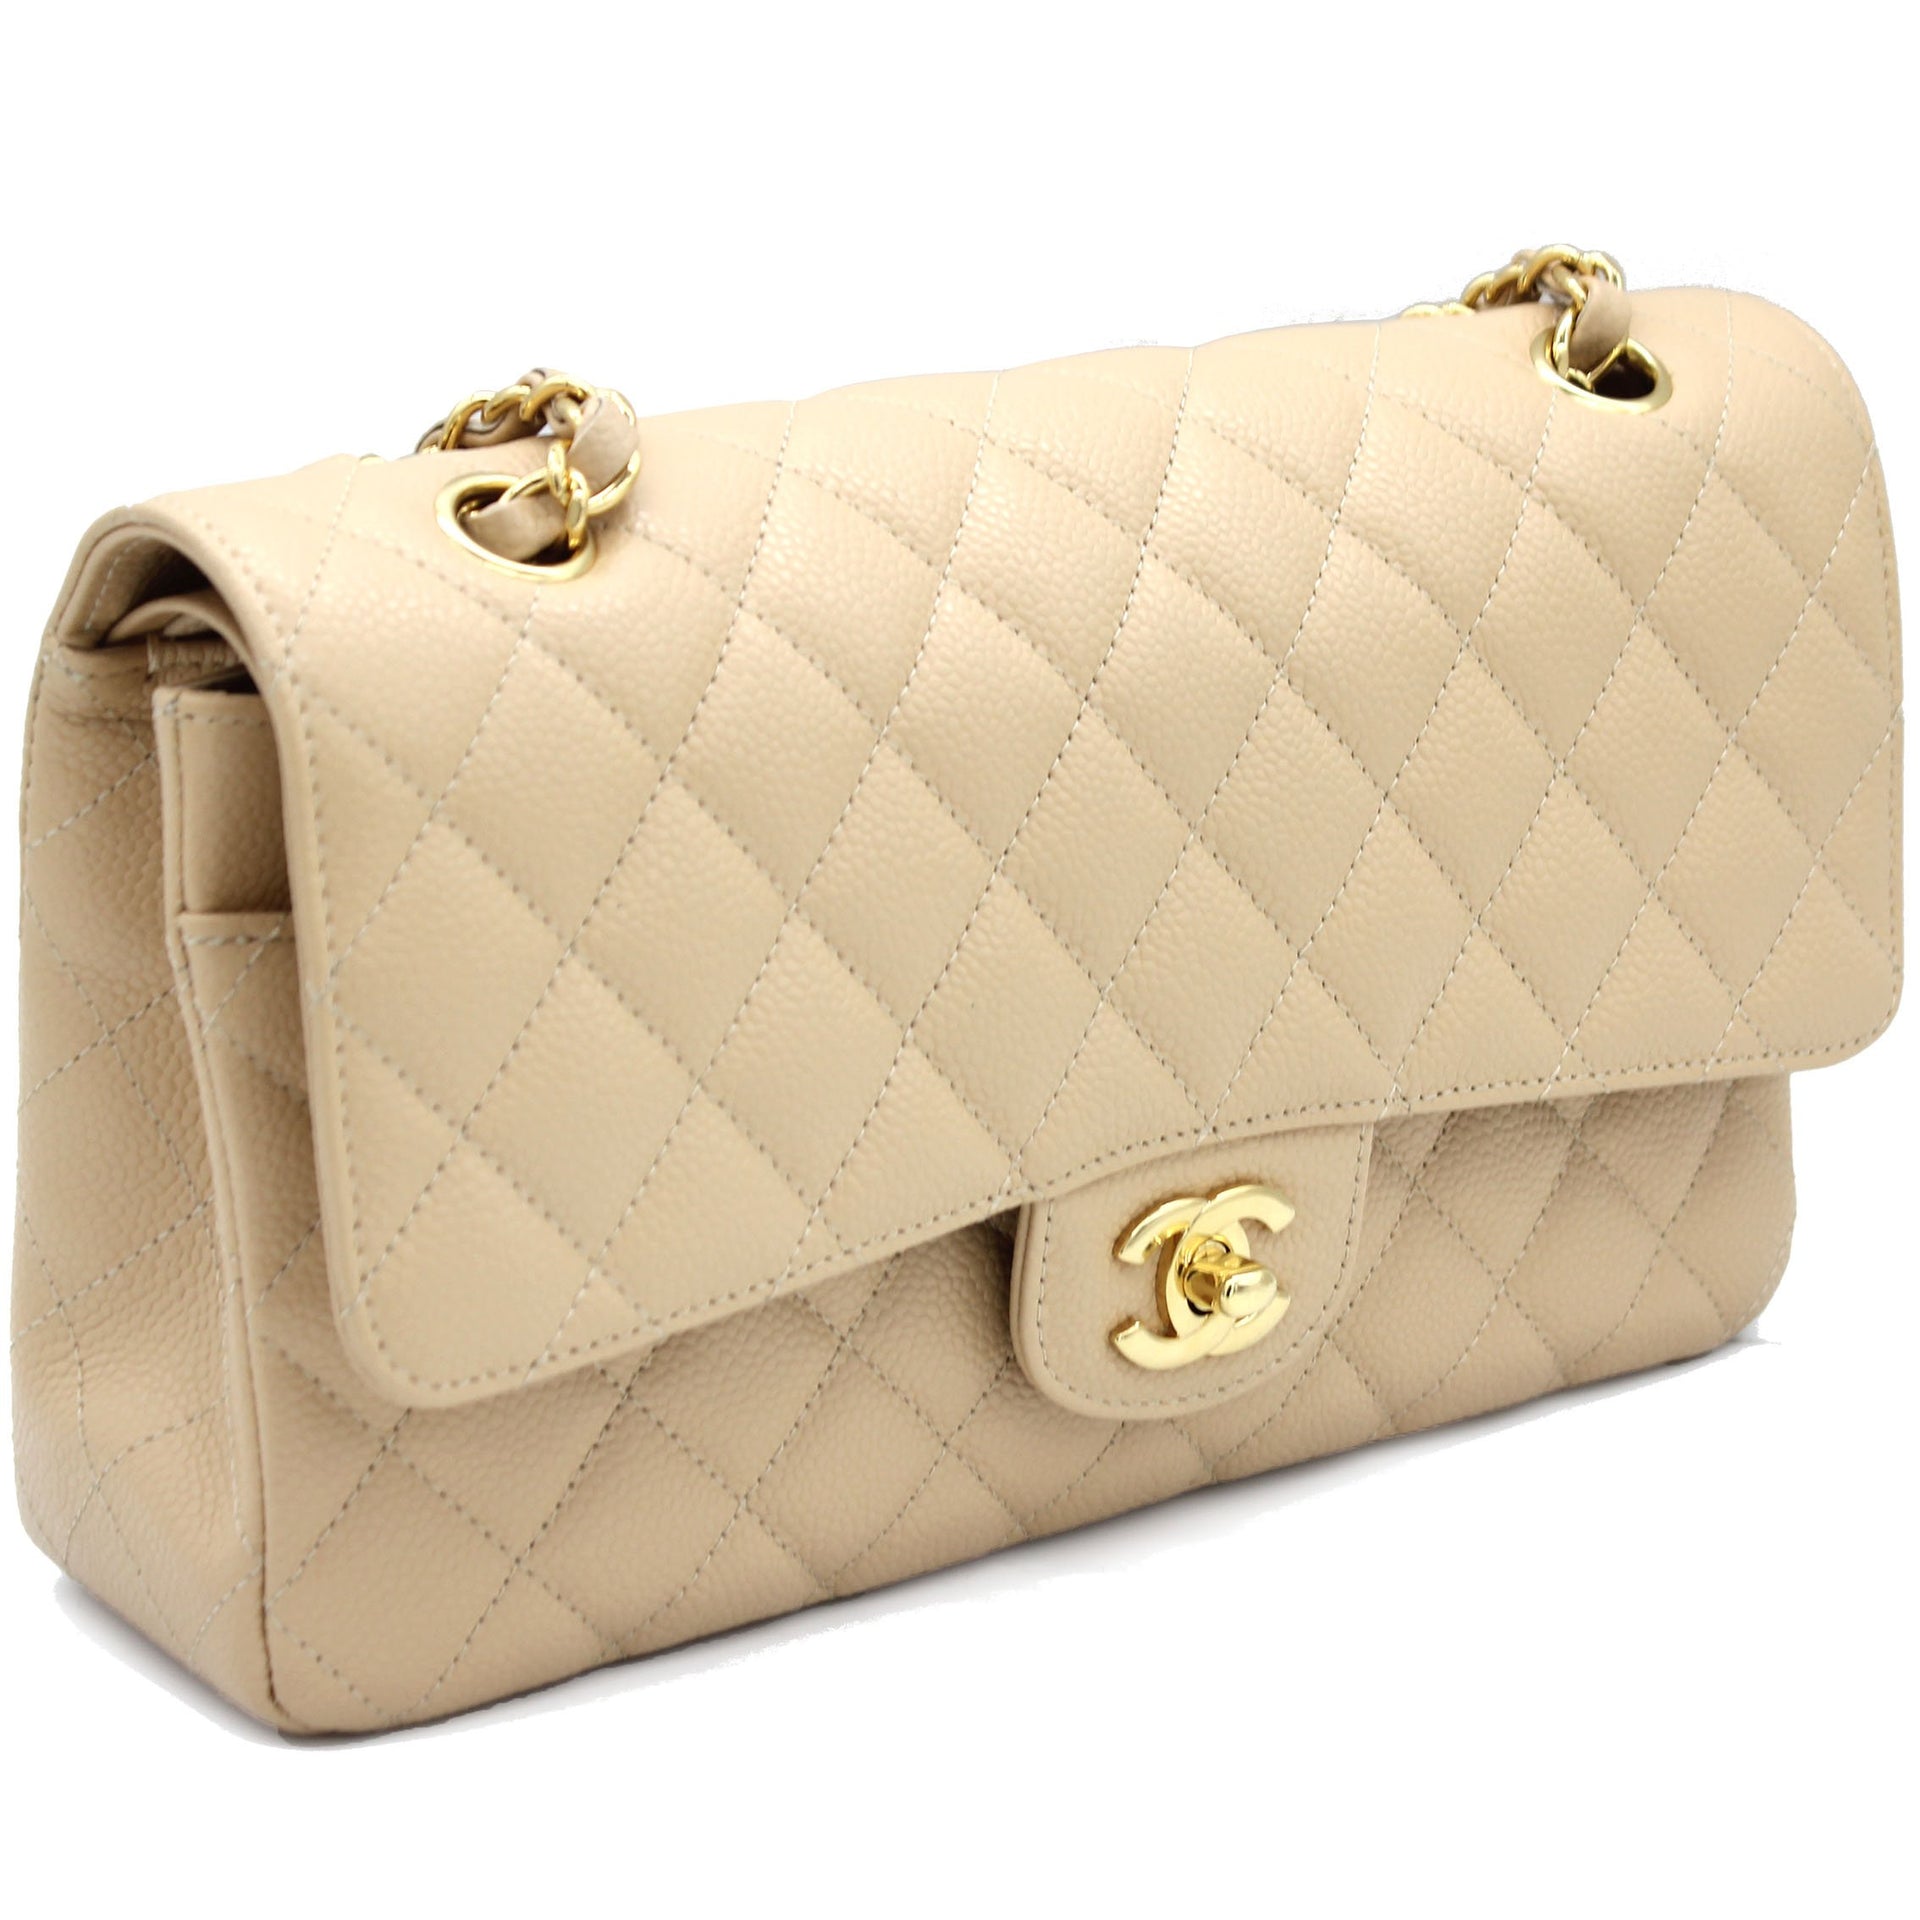 Chanel Beige Quilted Caviar Leather Classic Double Flap Bag